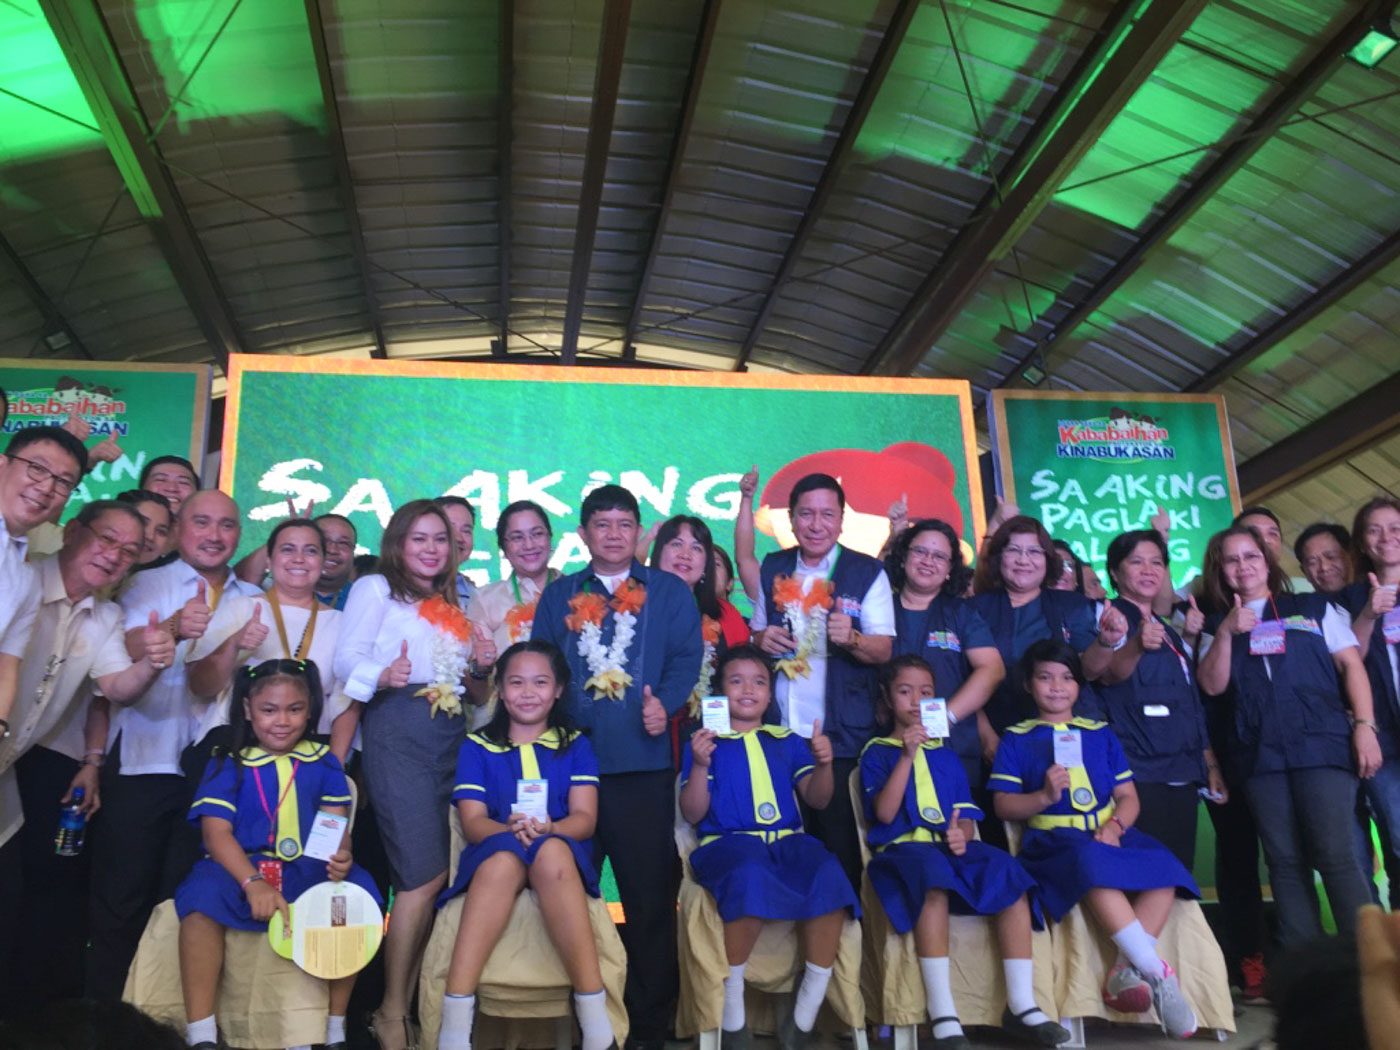 VACCINATED. Mandaluyong Representative Alexandria Gonzales (5th from left), Mayor Carmelita Abalos (6th from left), and Health Undersecretary Gerardo Bayugo (8th from left) pose with schoolgirls after their vaccination. Photo by Mara Cepeda/Rappler  